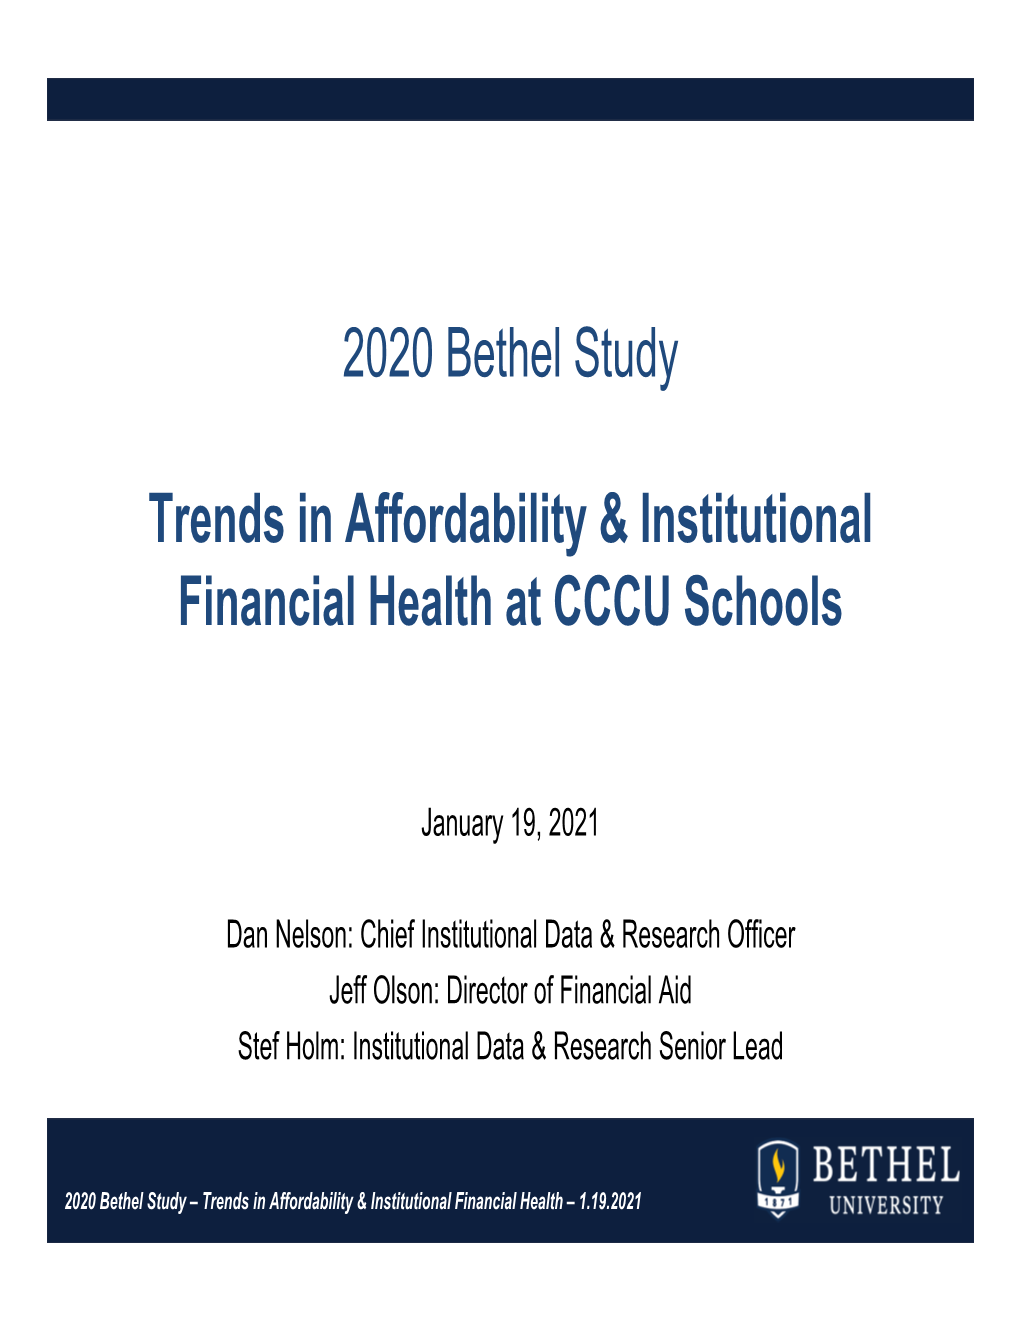 2020 Bethel Study Trends in Affordability & Institutional Financial